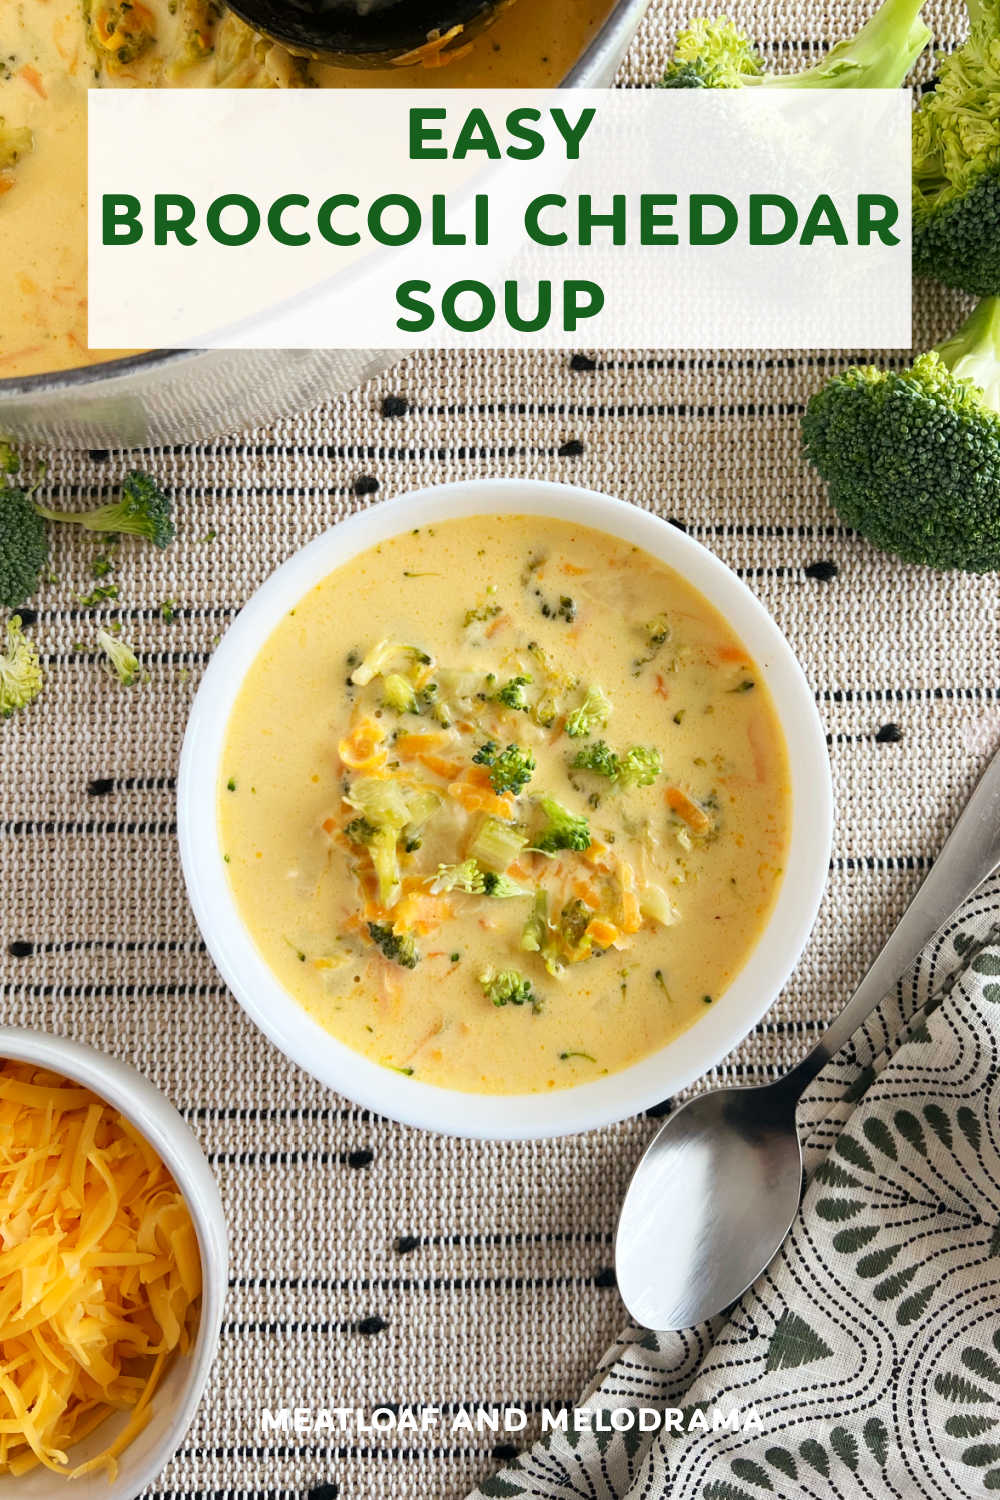 Broccoli Cheddar Soup is an easy soup recipe made with fresh broccoli florets, carrots and lots of cheddar cheese in one pot in only 30 minutes. Serve this delicious soup with crusty bread for an easy weeknight meal the whole family will love! via @meamel